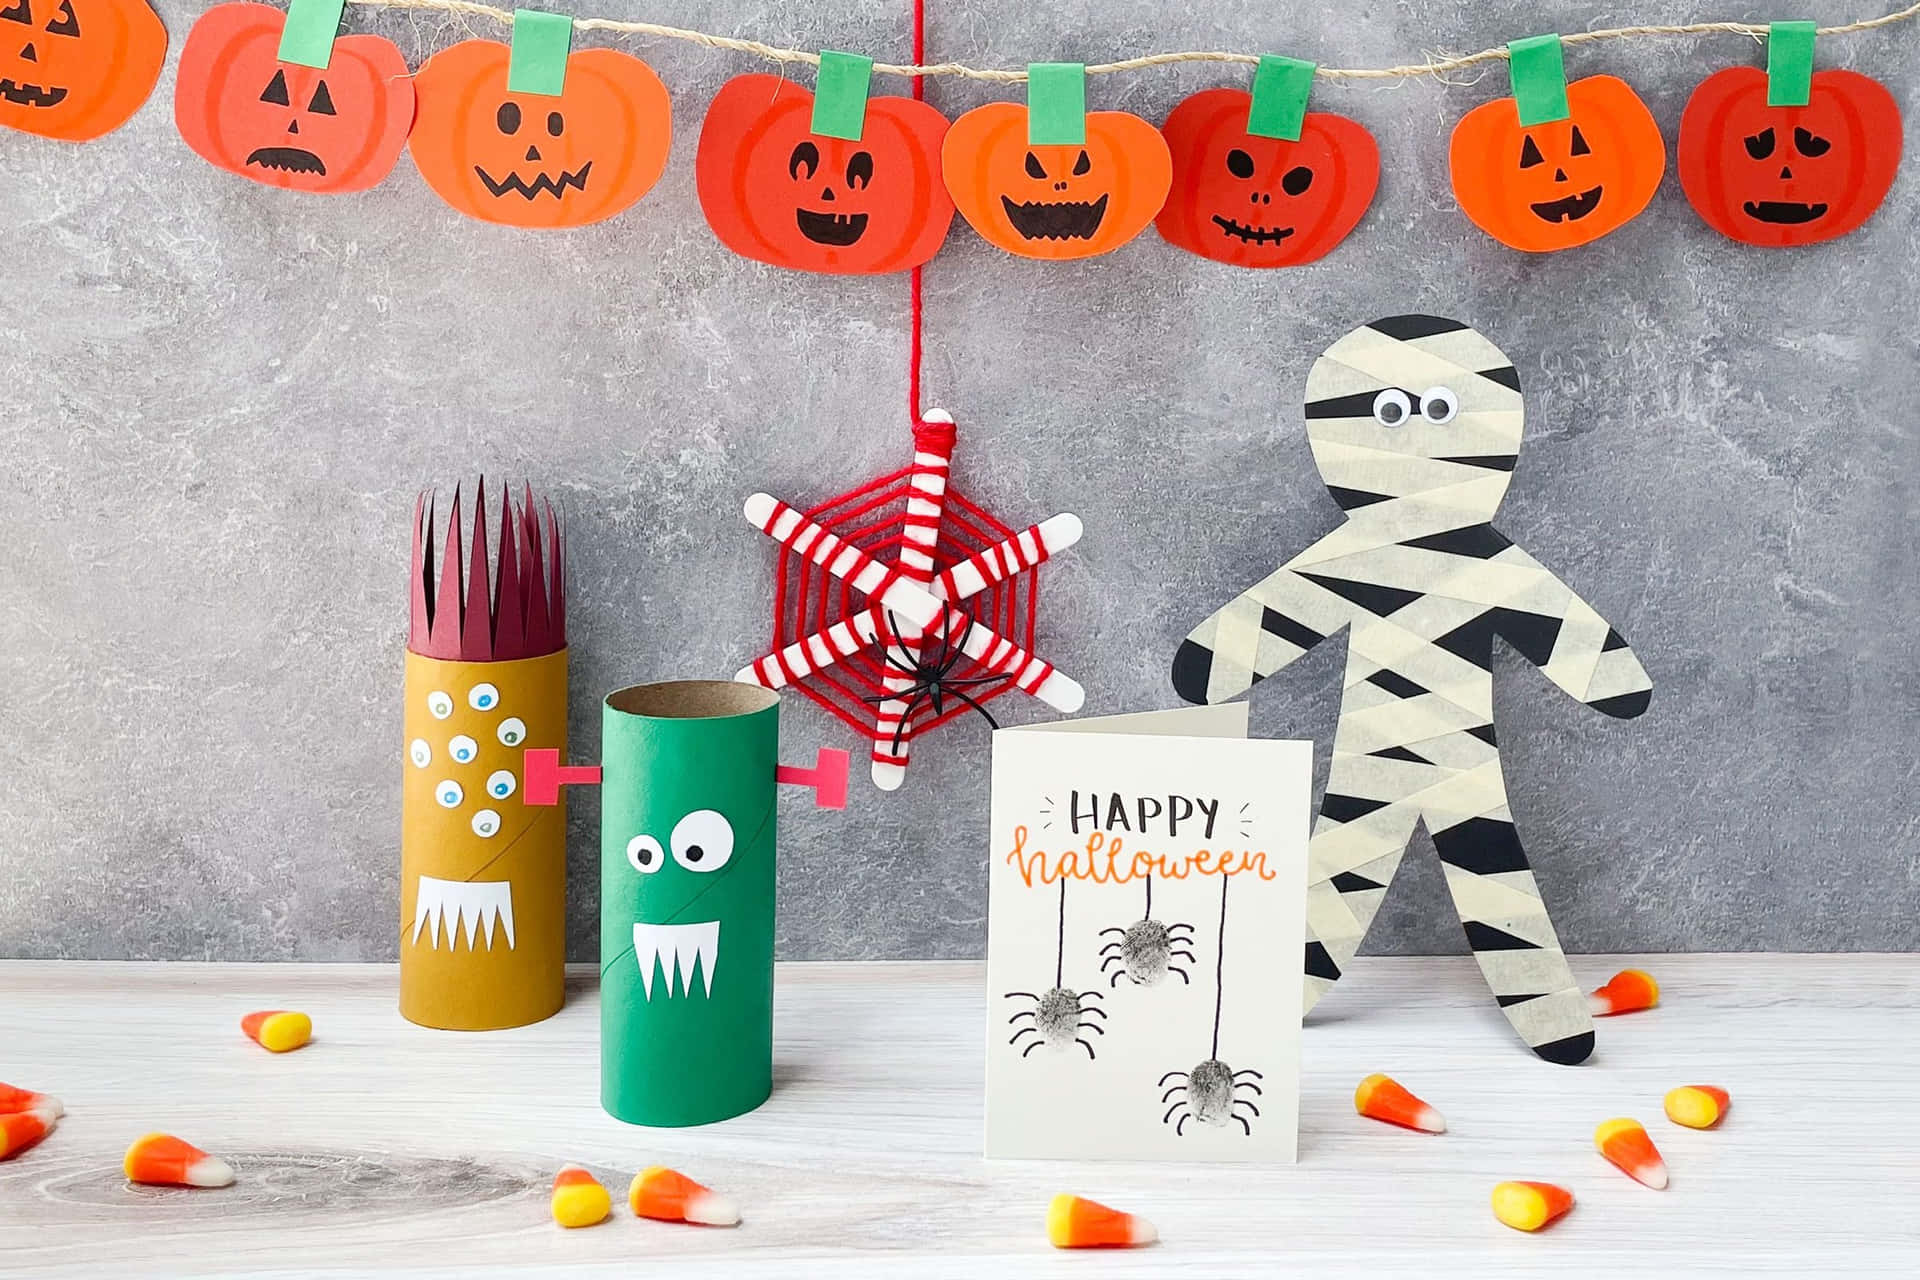 Get Ready For Halloween With Haunted Decorations and Props Wallpaper